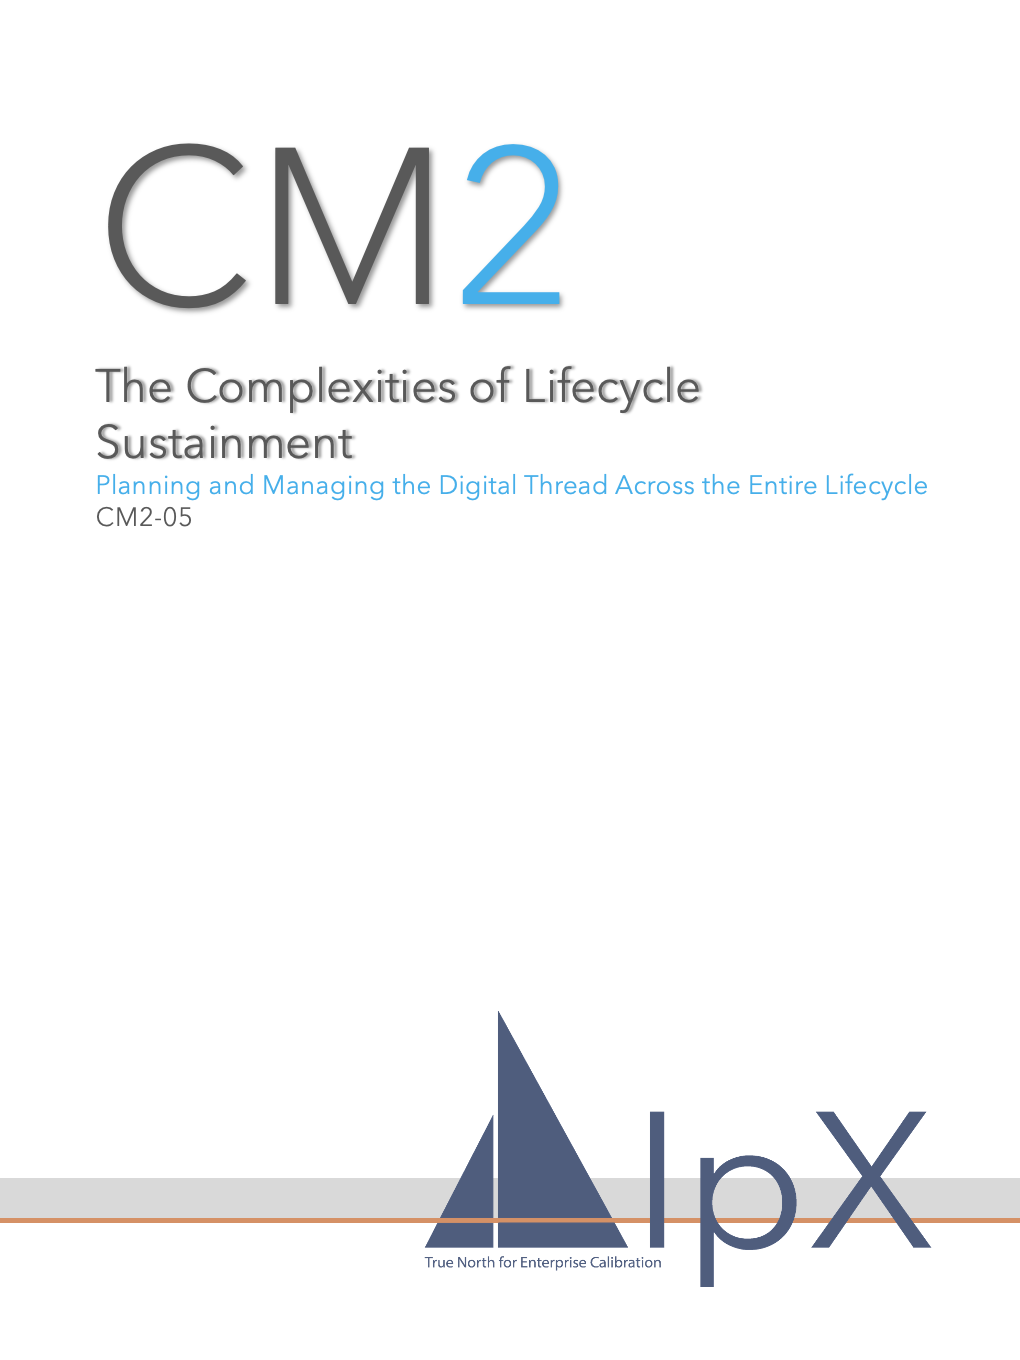 The Complexities of Lifecycle Sustainment Course